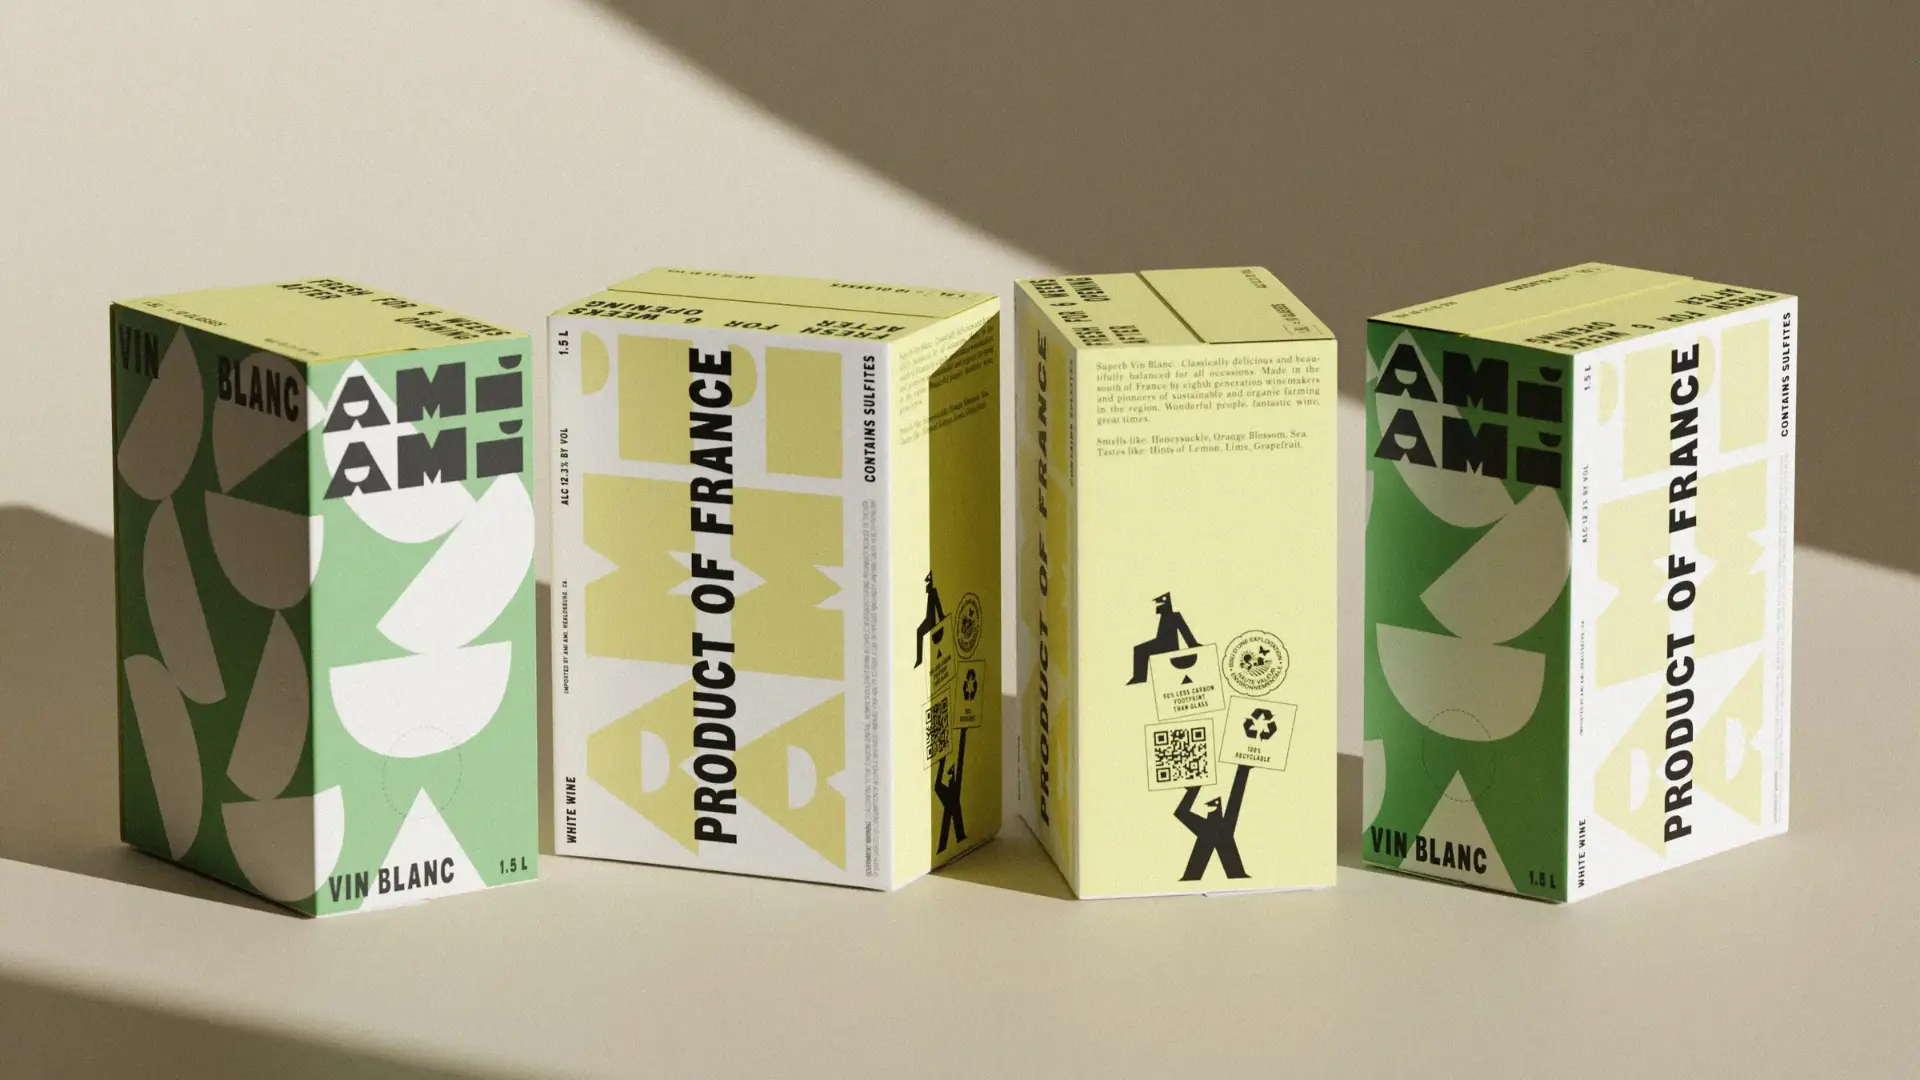 Is boxed wine becoming cool? Wedge sustainably shows us how